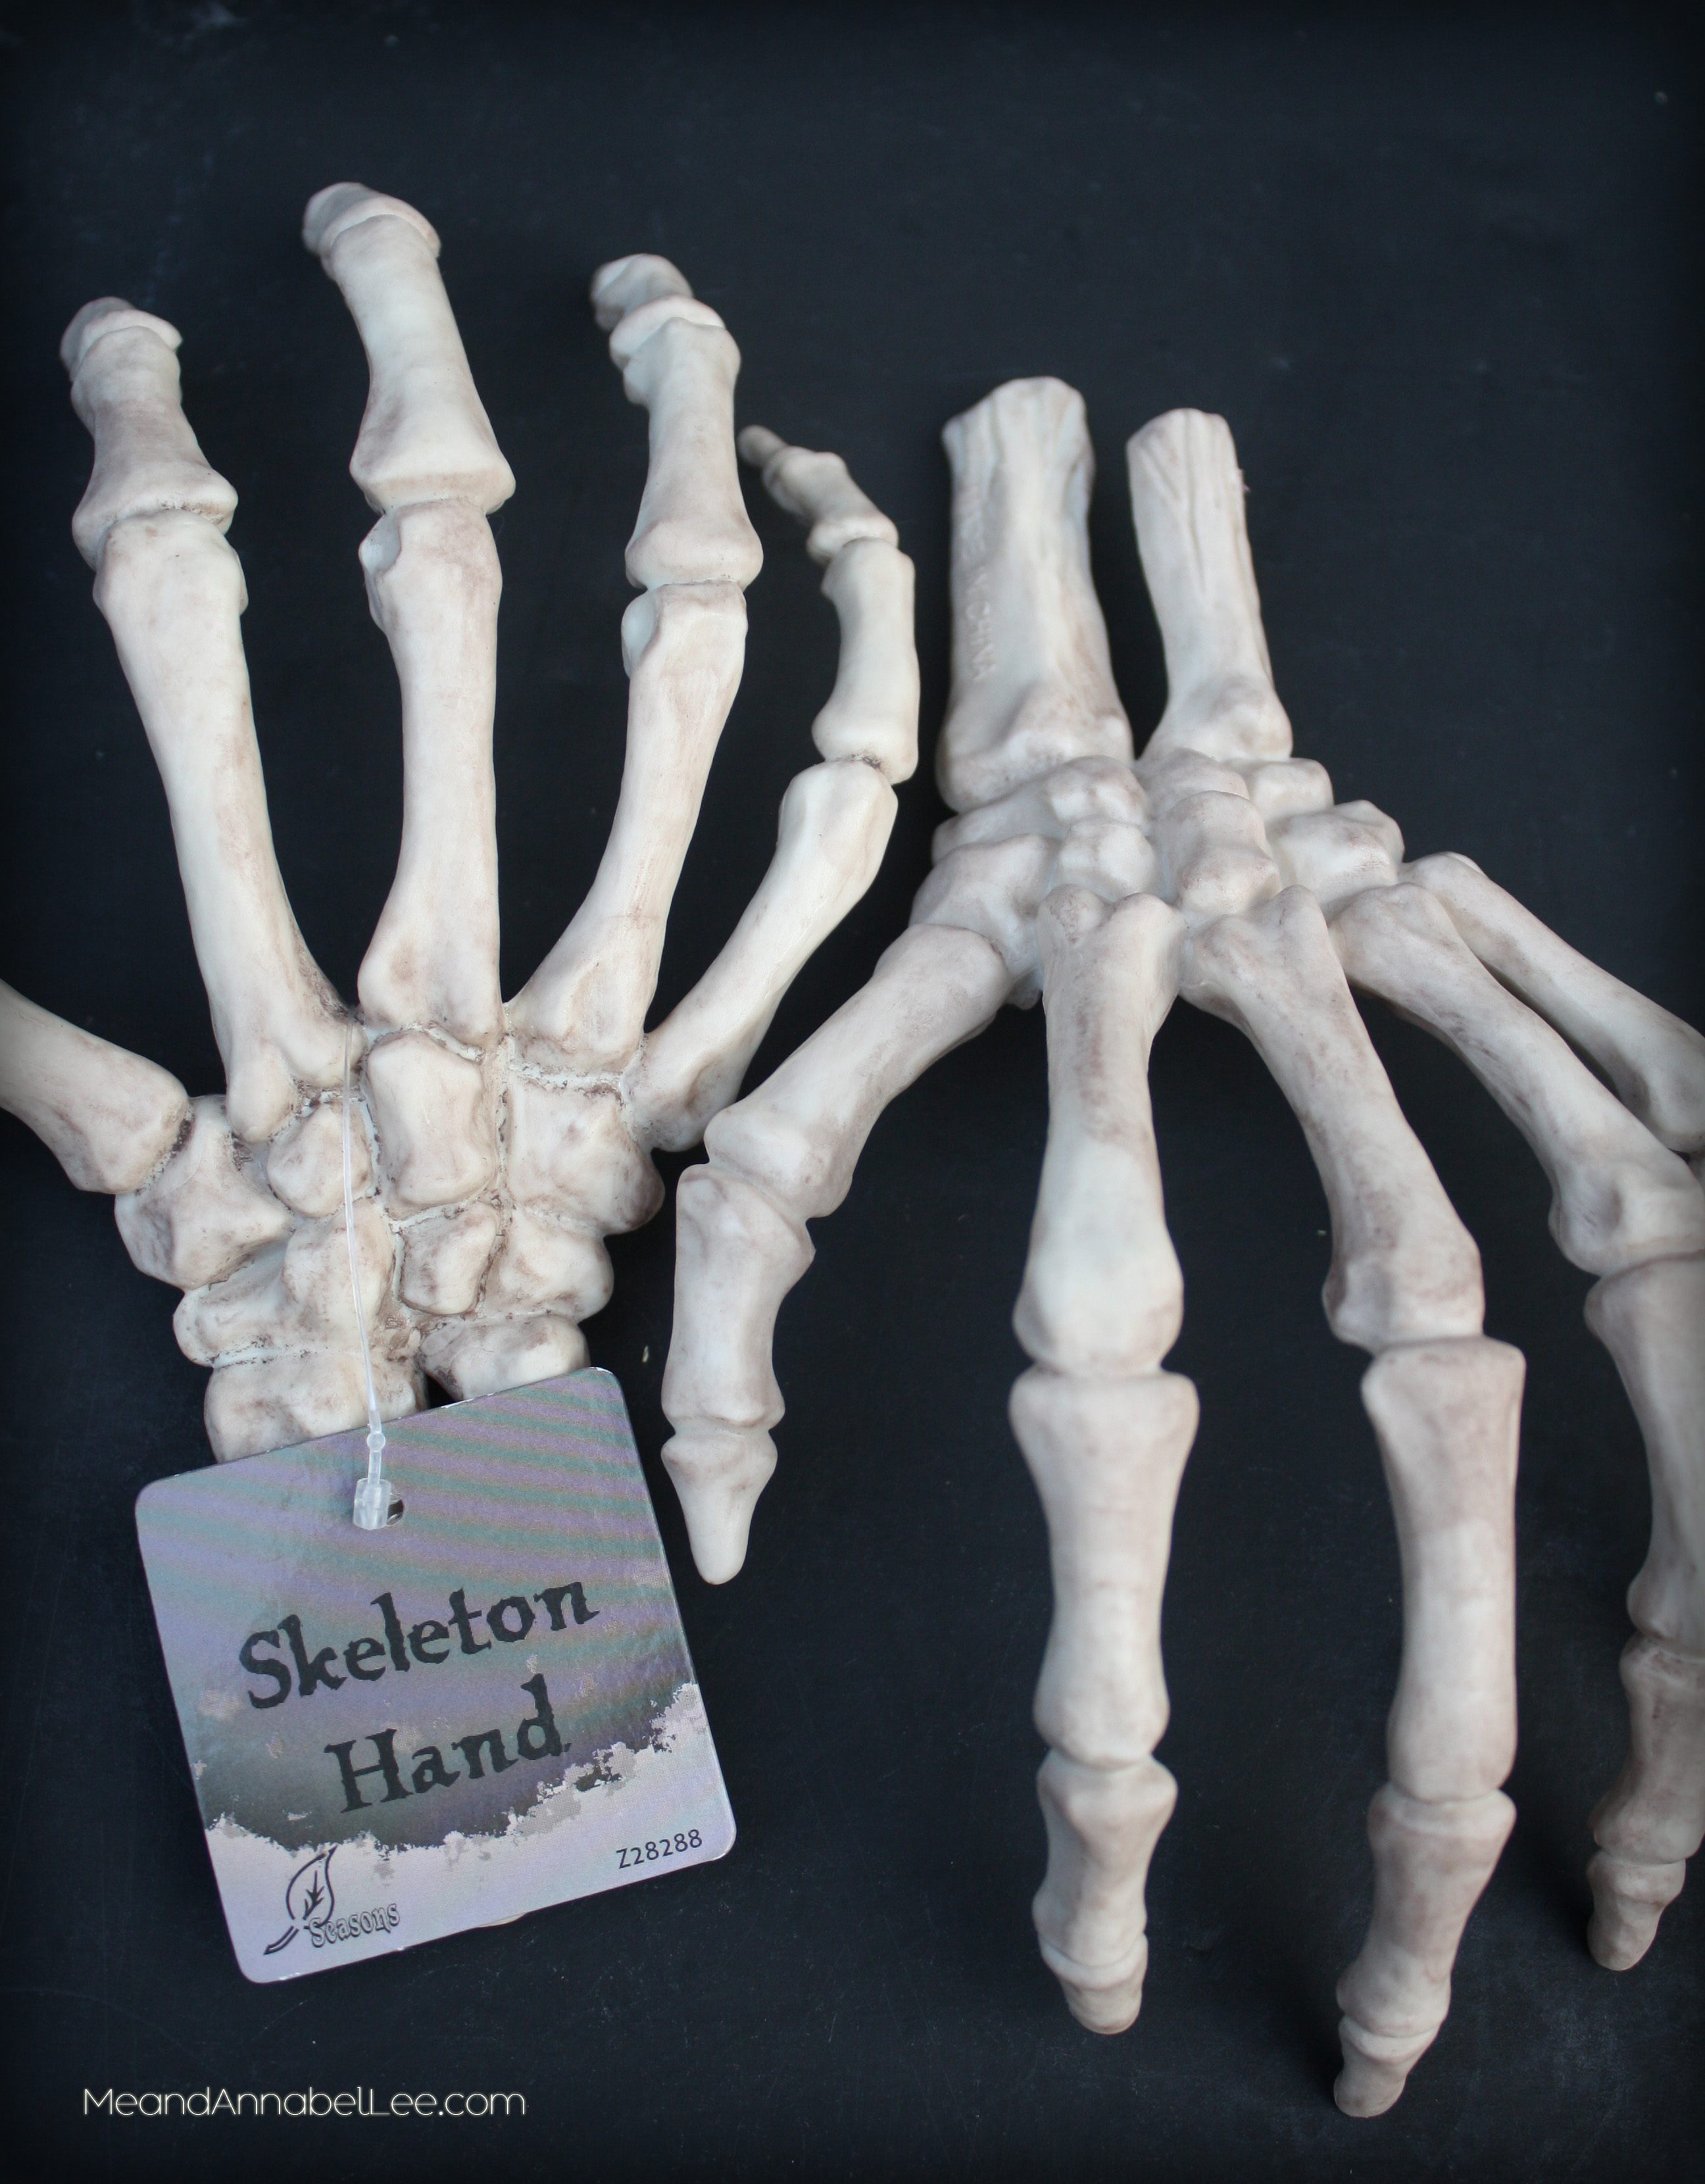 Skeleton Hands - Learn to make Halloween Place Card holders and Napkin Rings | Gothic Dinner Party | www.MeandAnnabelLee.com